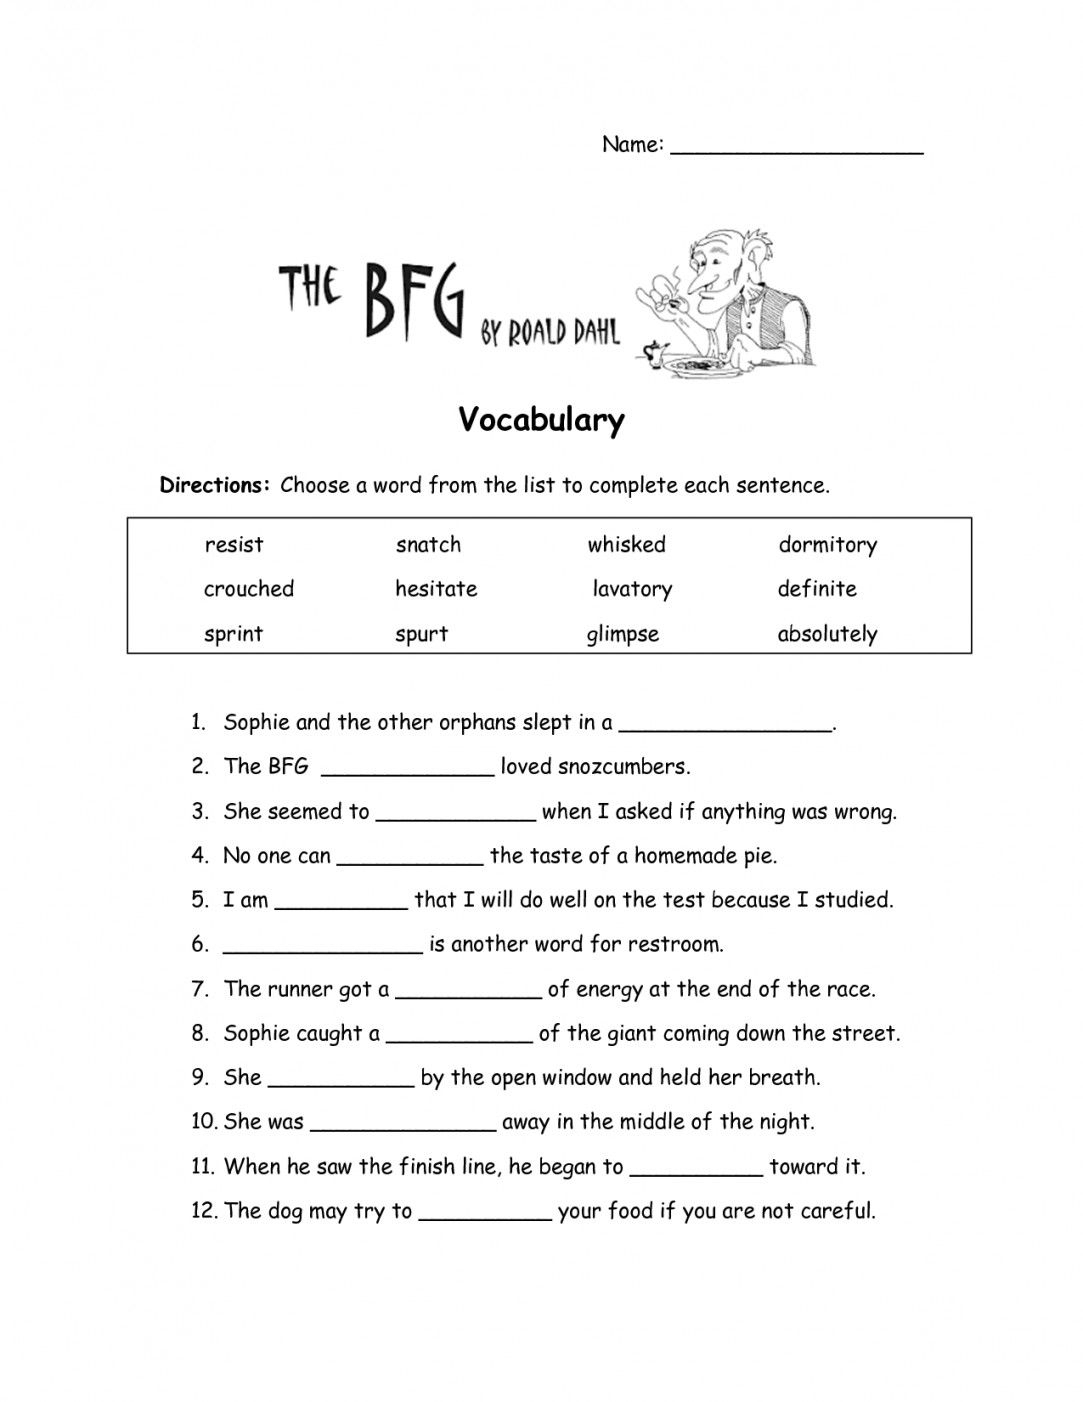 Free Printable Vocabulary Worksheets | Lostranquillos - Free | Free Printable Portuguese Worksheets